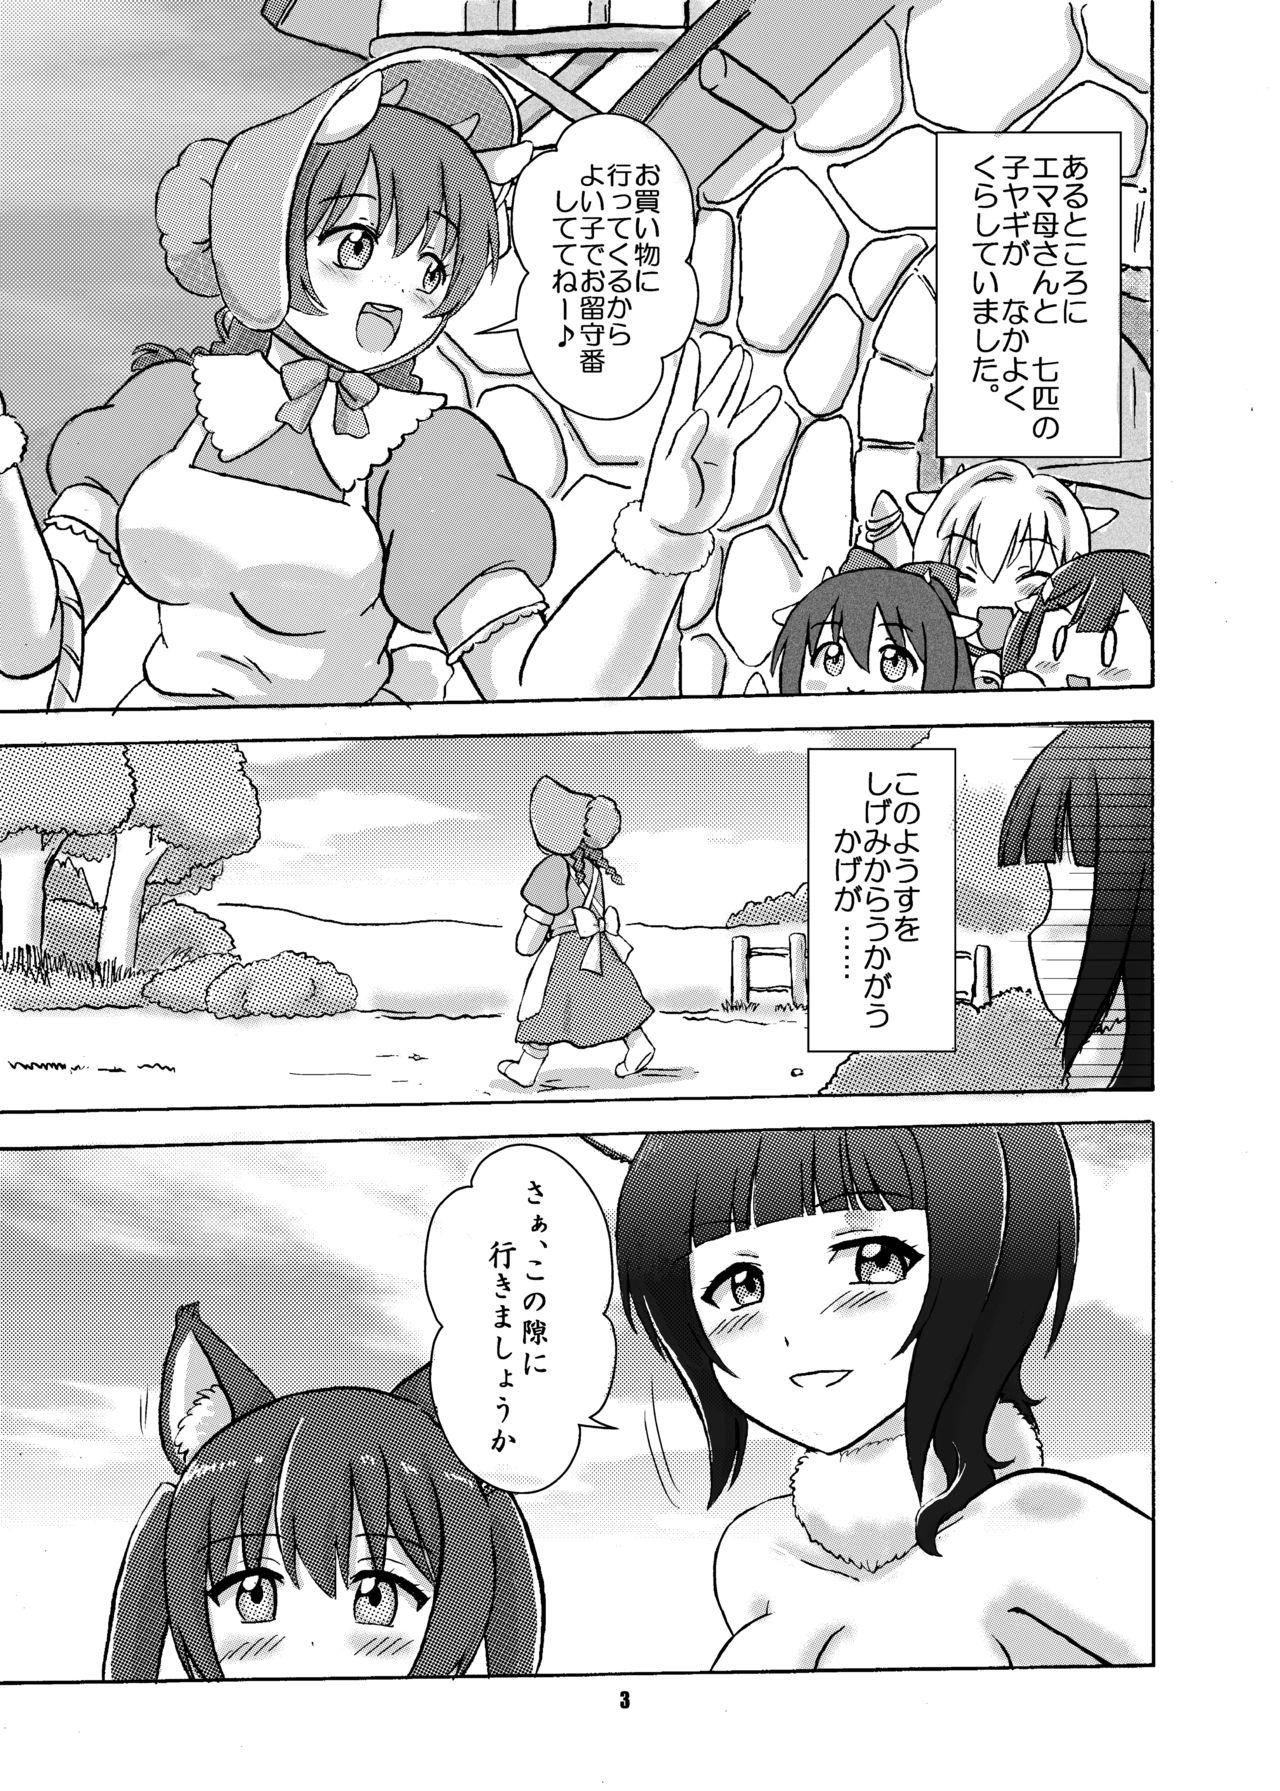 Blackcocks Wolf and Seven Goats - Love live Load - Page 2